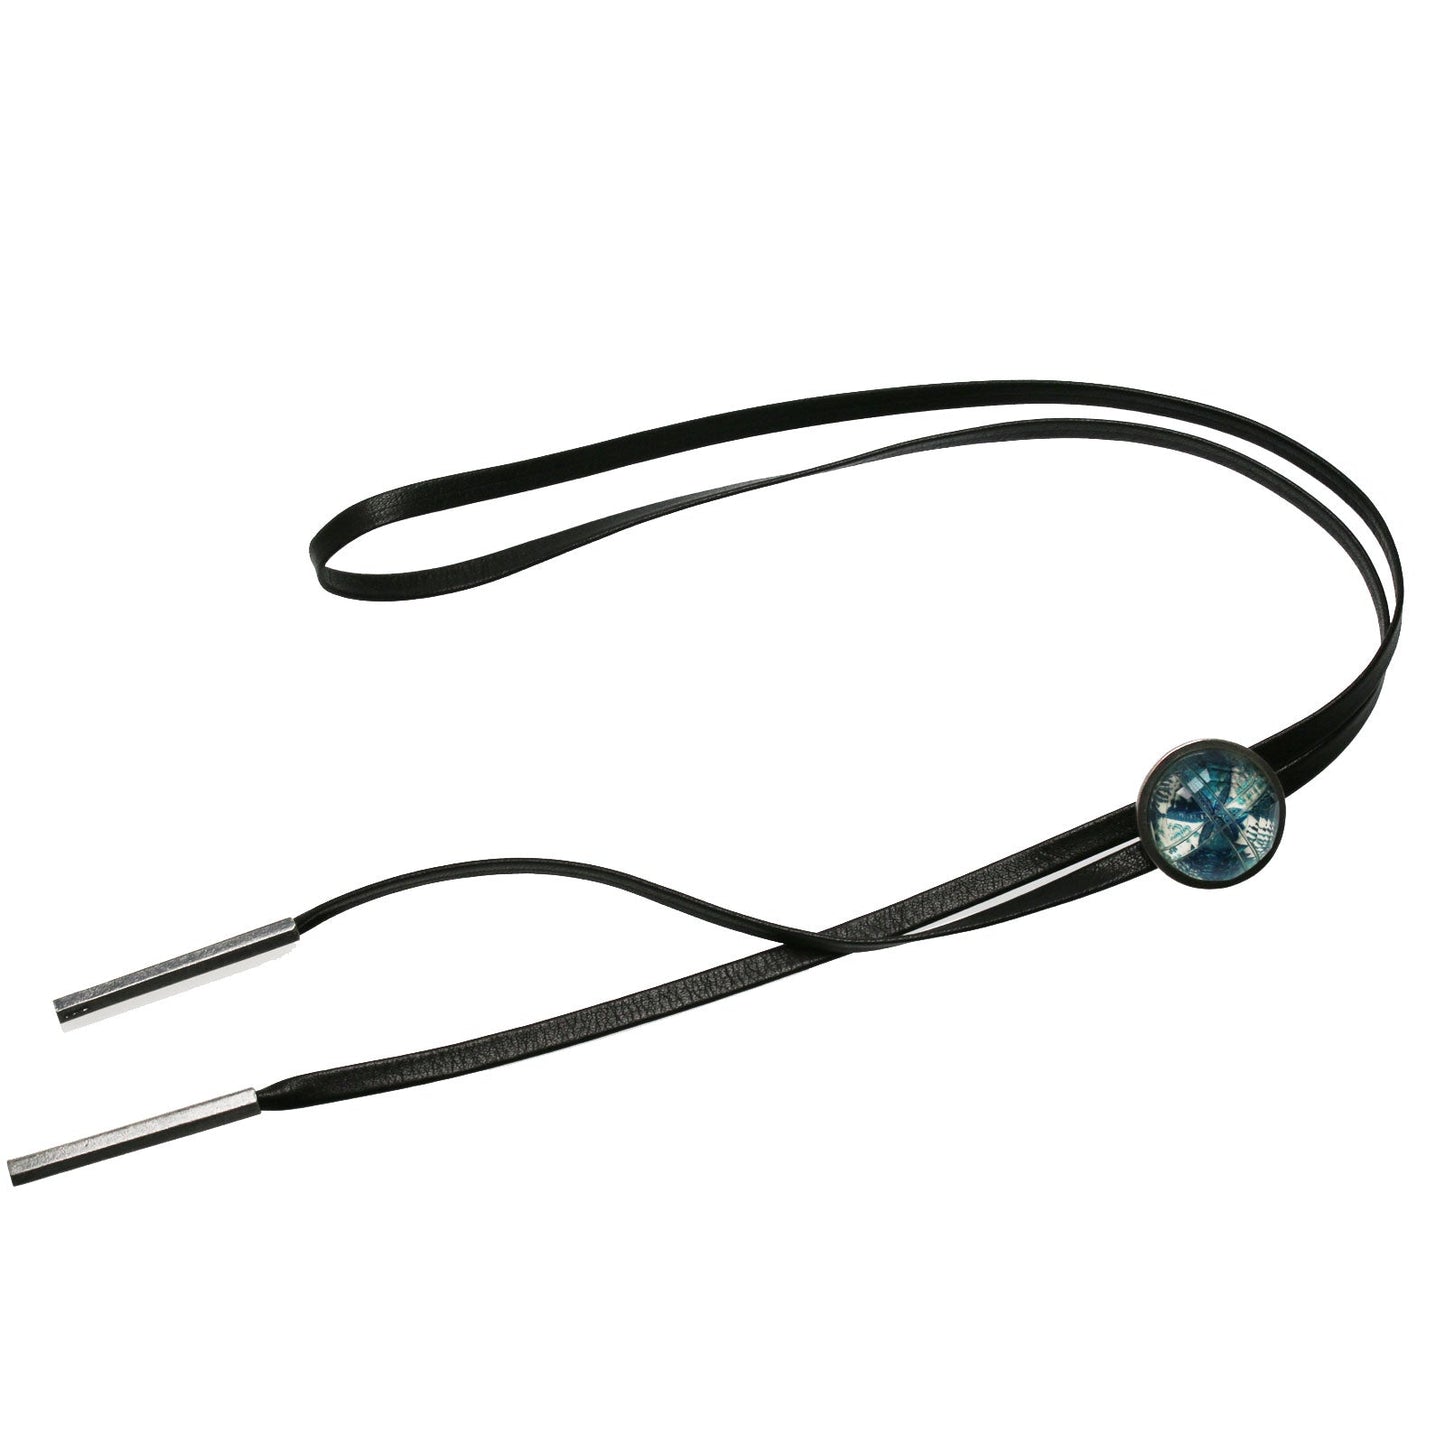 Leather Straps Bolo Tie Lily Blue Handmade TAMARUSAN